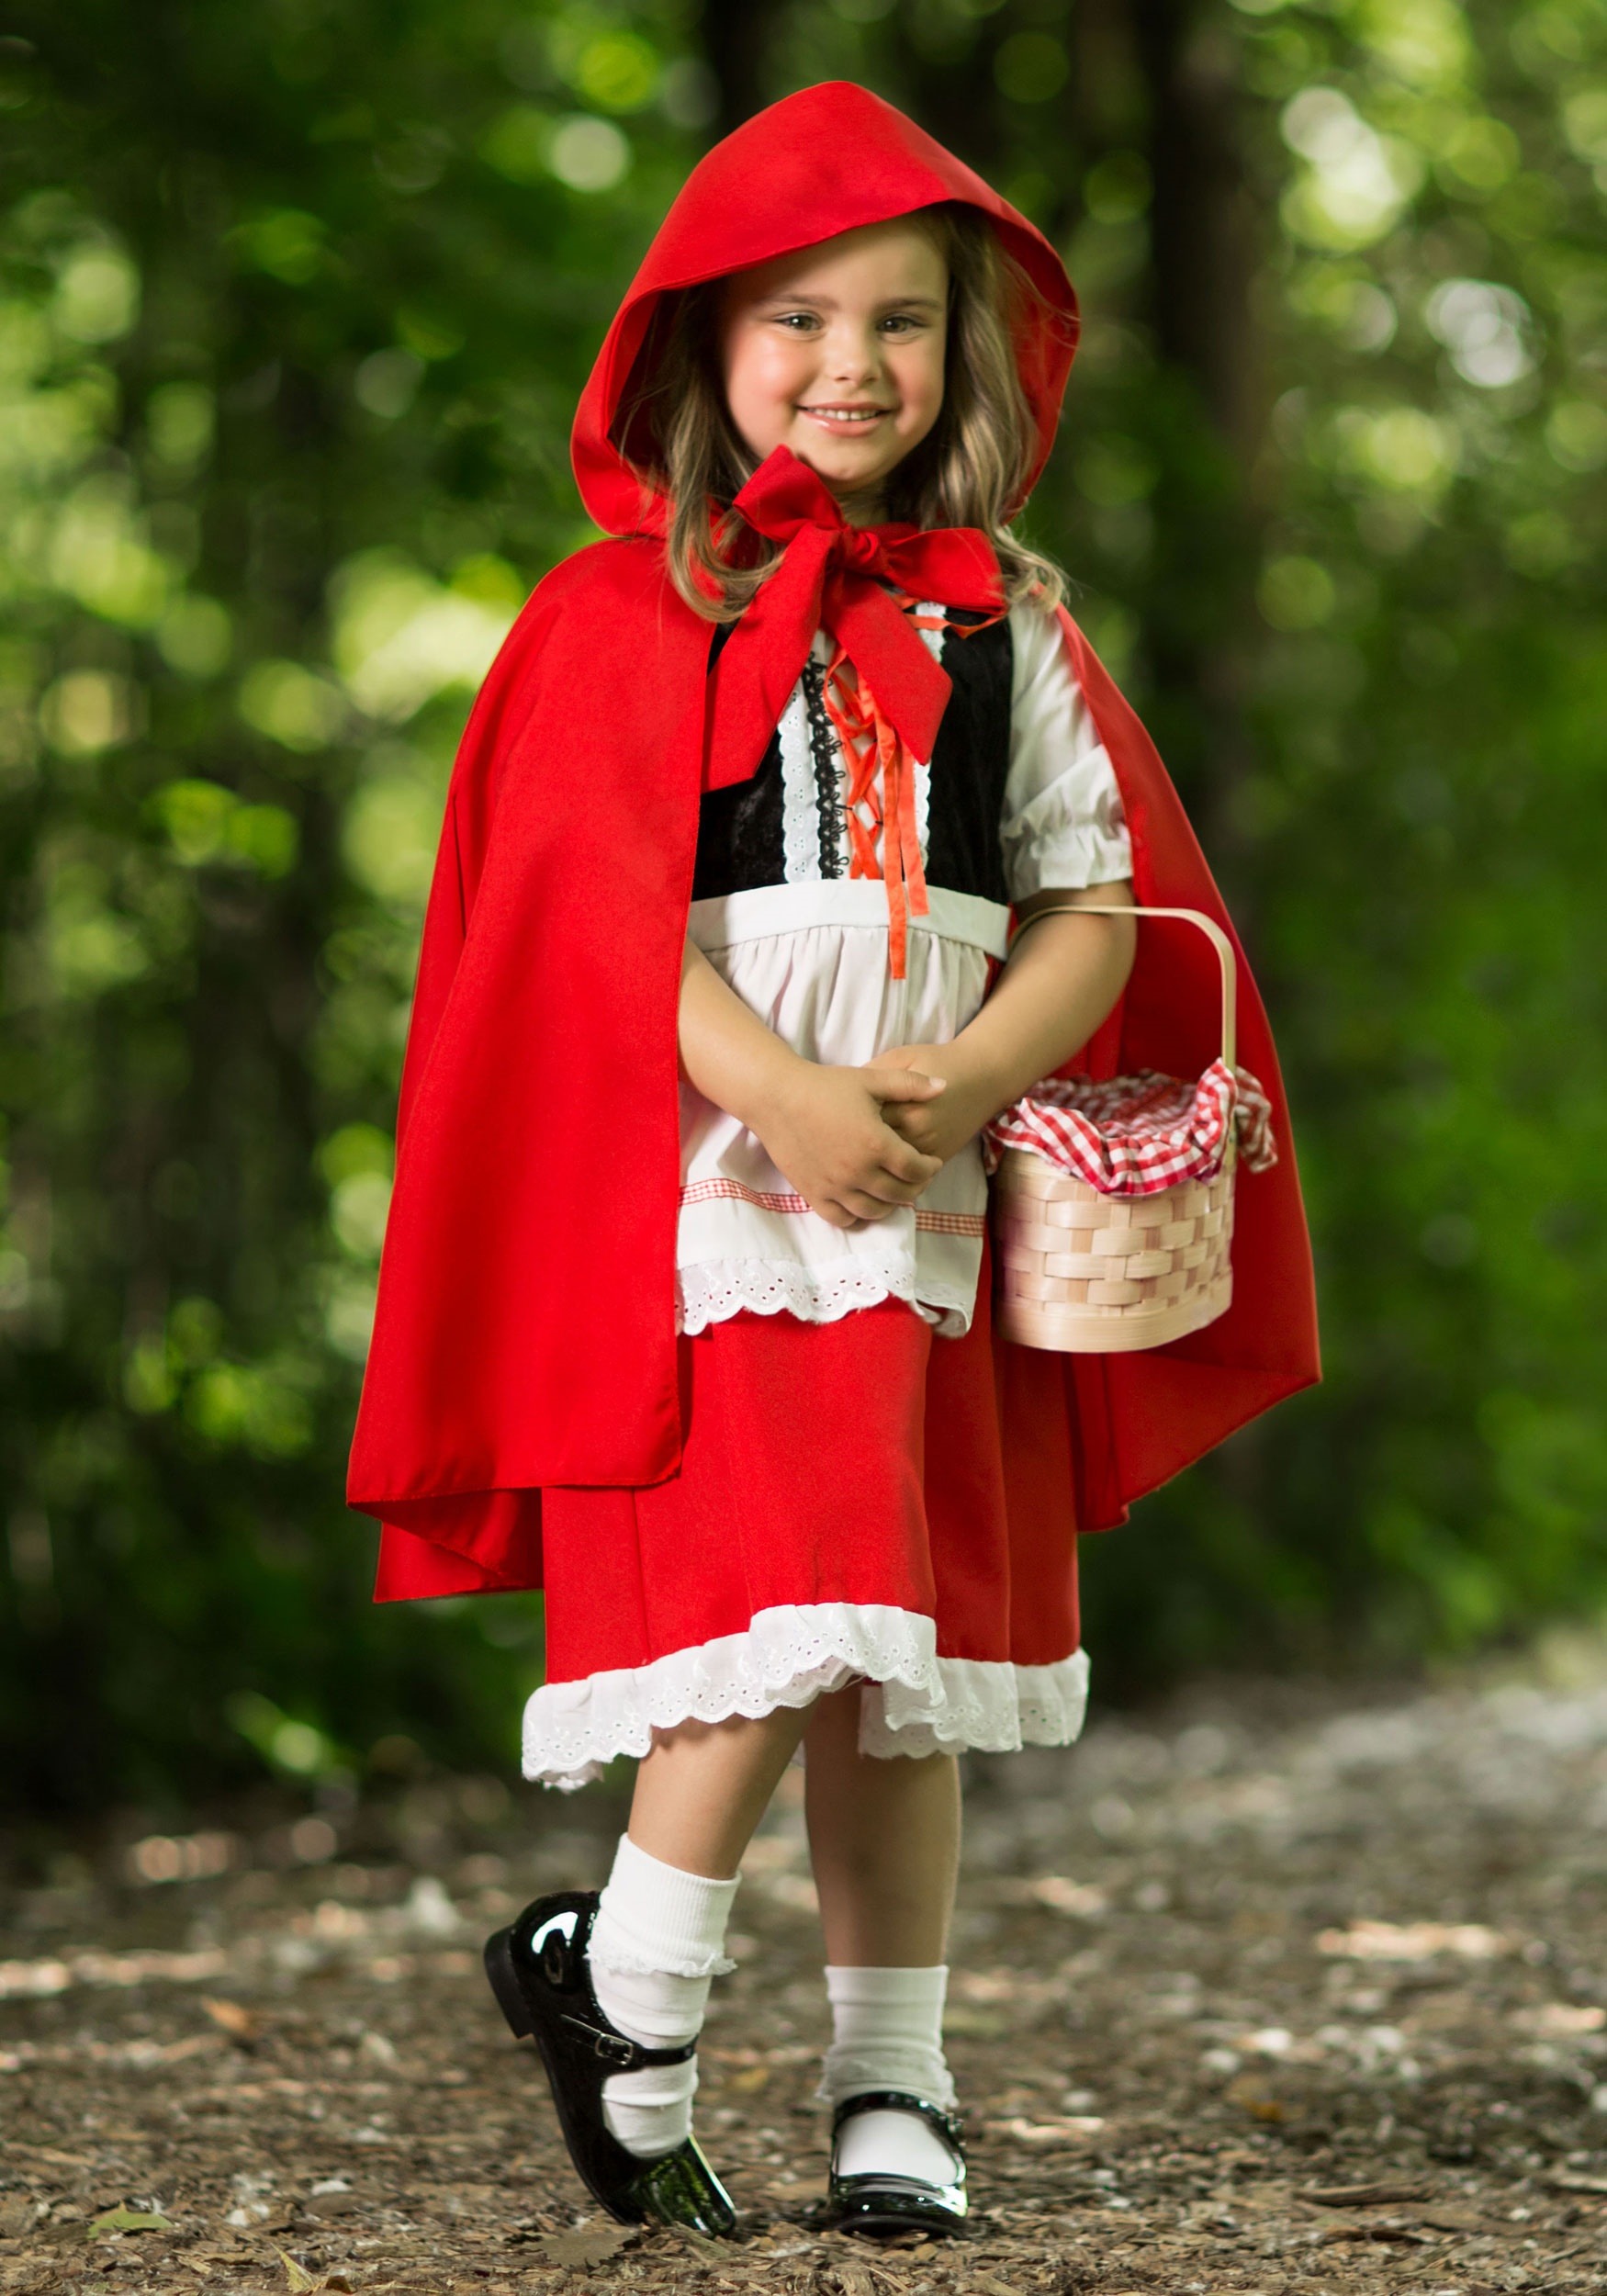 Red　Little　Costume　Riding　Hood　Deluxe　Girls